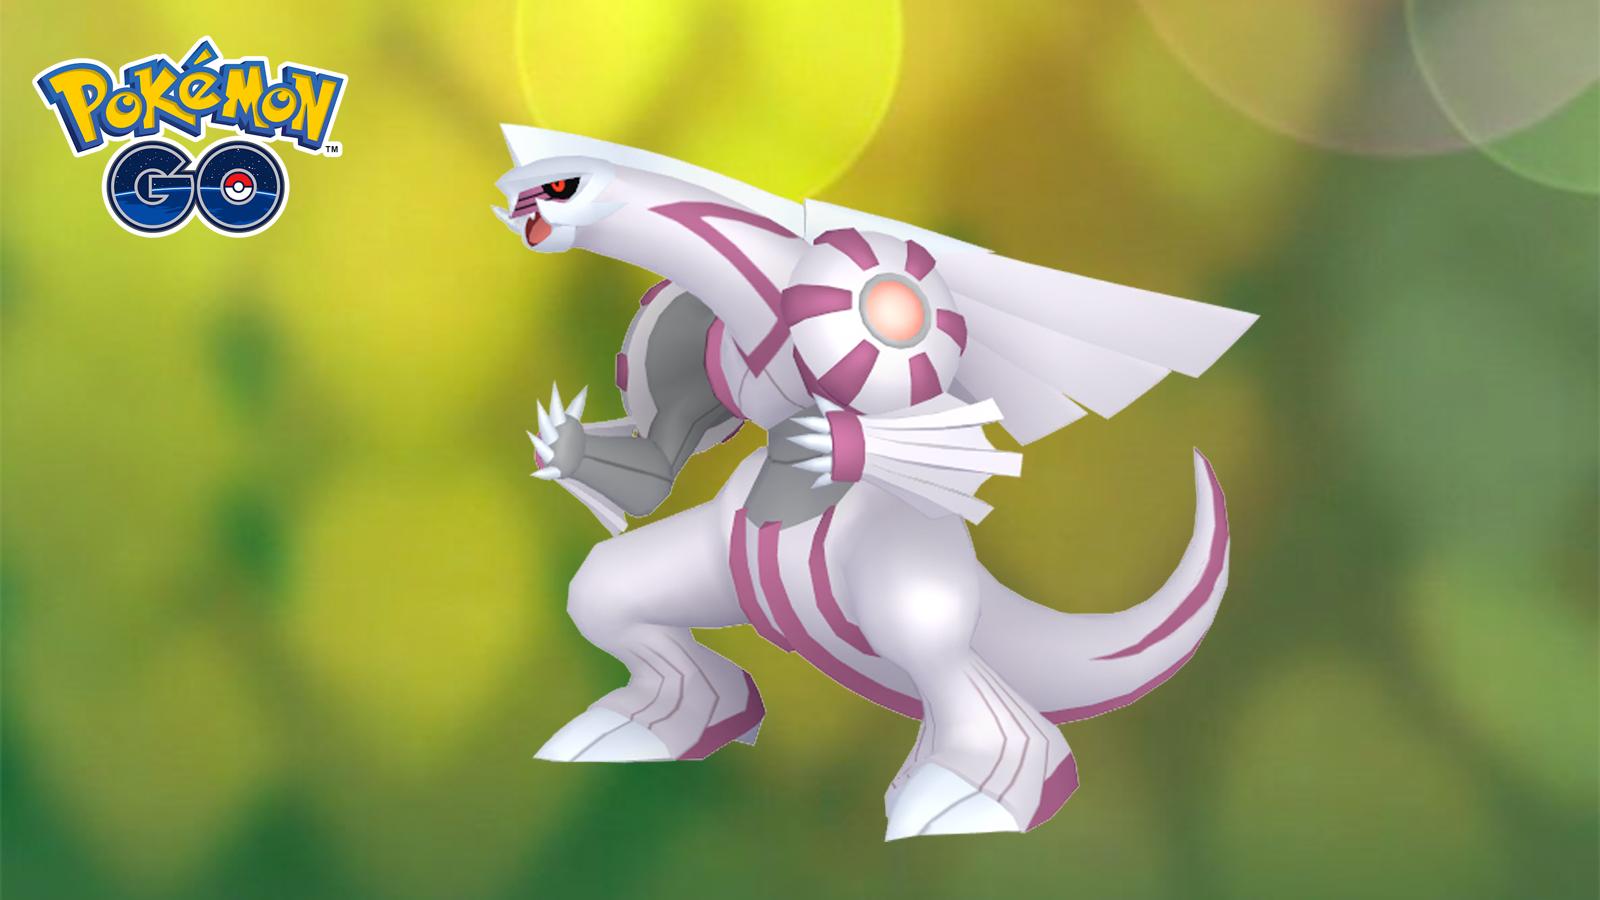 Palkia in the Pokemon Go Battle League with the best moveset